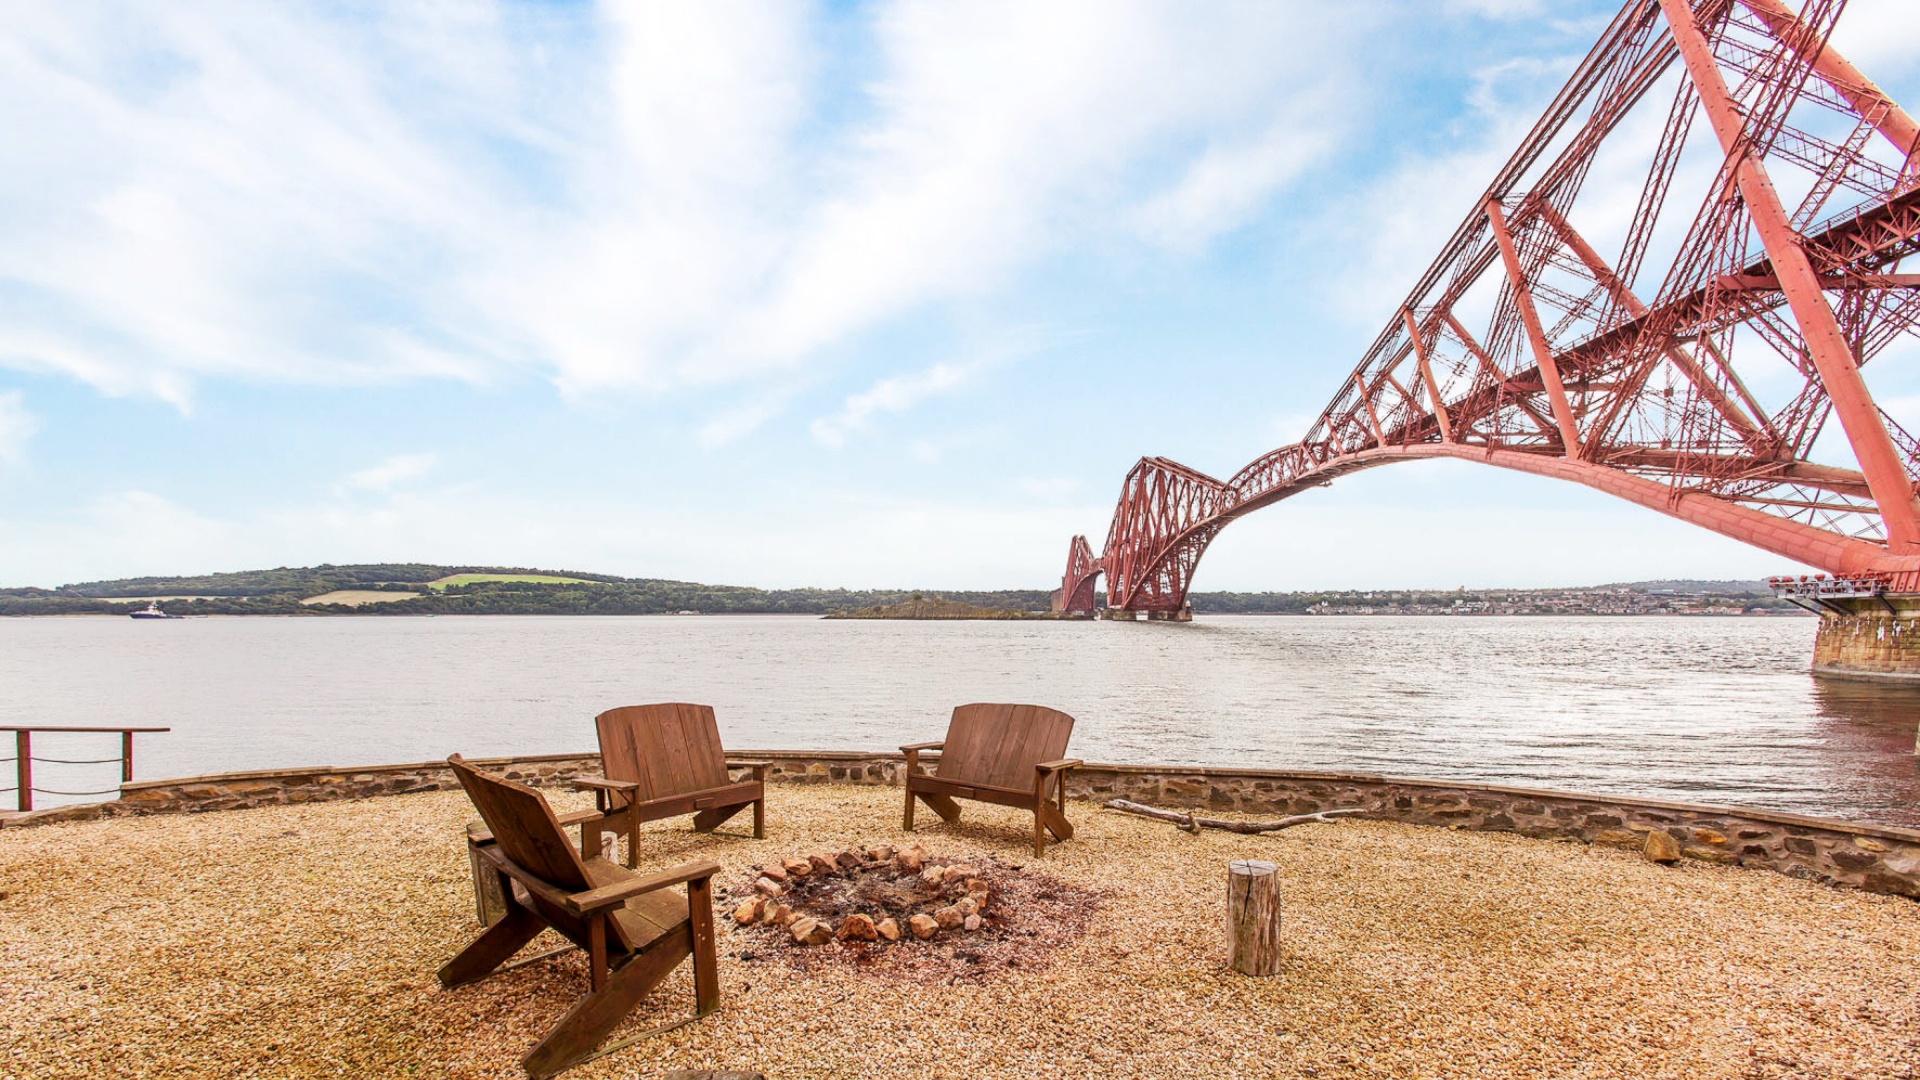 The newly-built south-facing Taigh Na Rubha offers a panaroma across the water near North Queensferry.